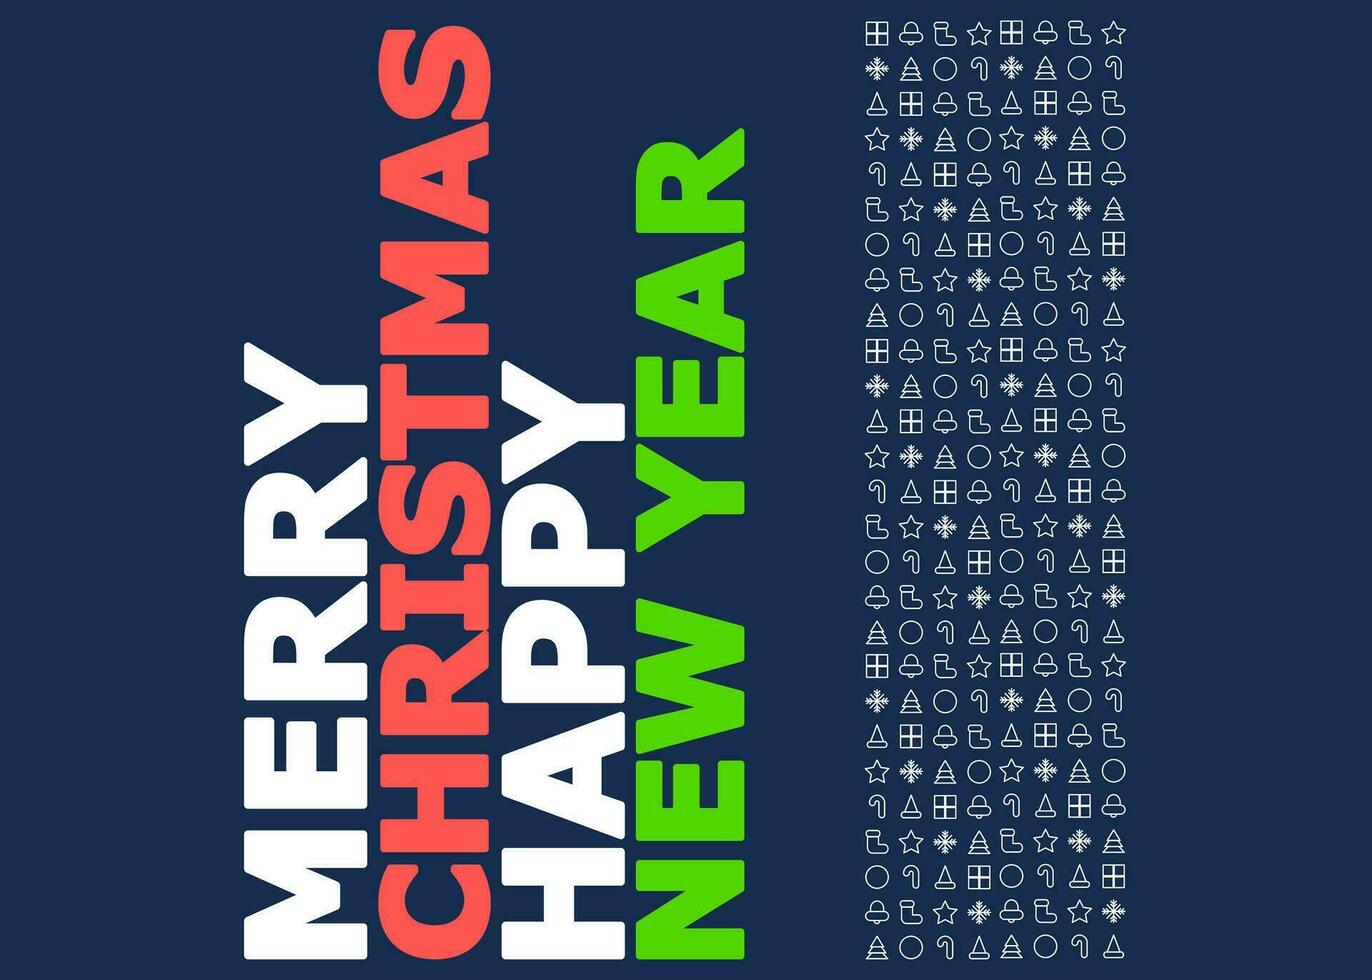 Greeting Card or Post Card or Gift Card with Merry Christmas and Happy New Year Text vector